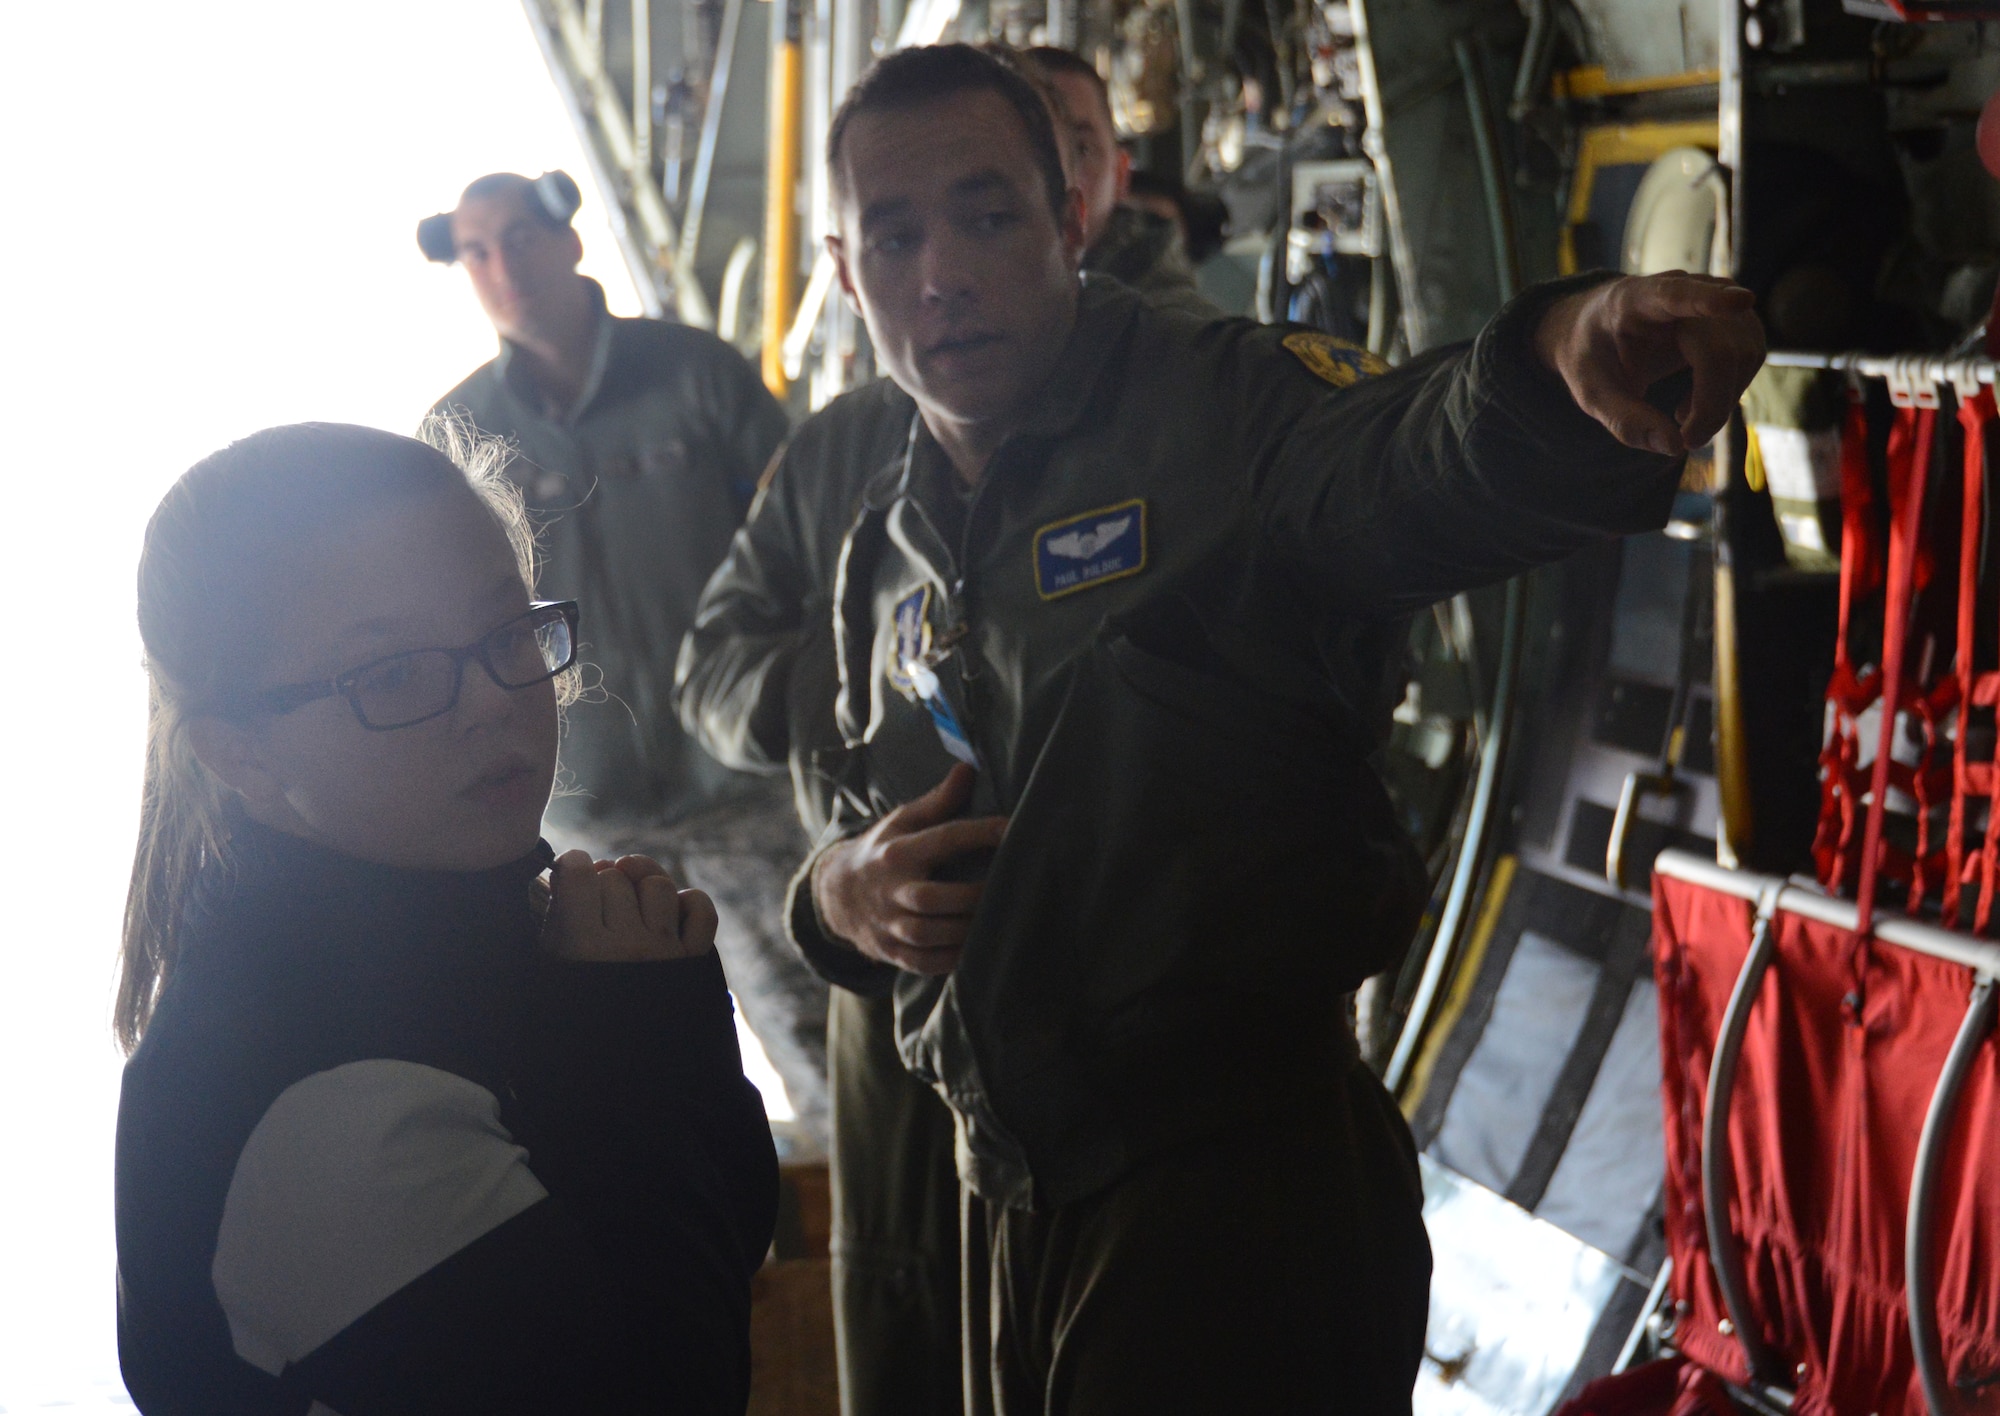 Looking down the belly of the C-130H, Tori Pilletere, 12, gets a fully immersive look and explanation of the capabilities of the aircraft by 1st Lt. Paul Bolduc, a pilot with the 118th Airlift Squadron, during a tour of the Bradley Air National Guard Base, East Granby, Conn., April 5,2014. The tour of the C-130H was part of the Connecticut Youth Council’s initiative to get more Air Guard youth involved with the council. (U.S. Air National Guard photo by Tech. Sgt. Joshua Mead)